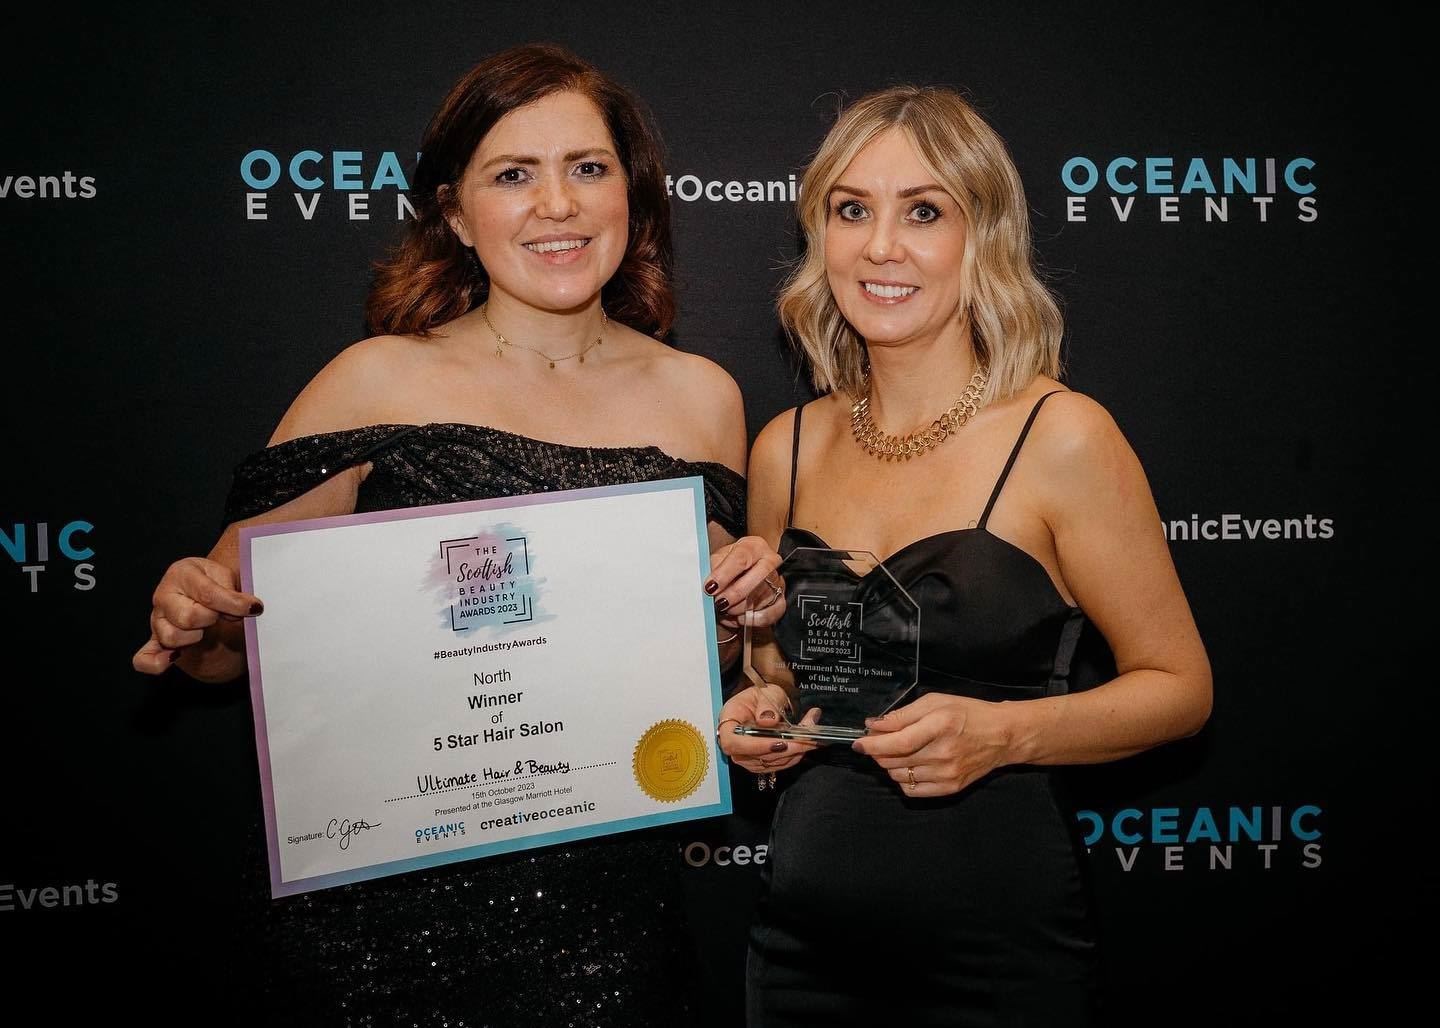 Catherine Smith owner of Ultimate Hair and Beauty (left) and Hailey Dallas owner of Hailey Dallas Brows were both recognised at the awards ceremony.